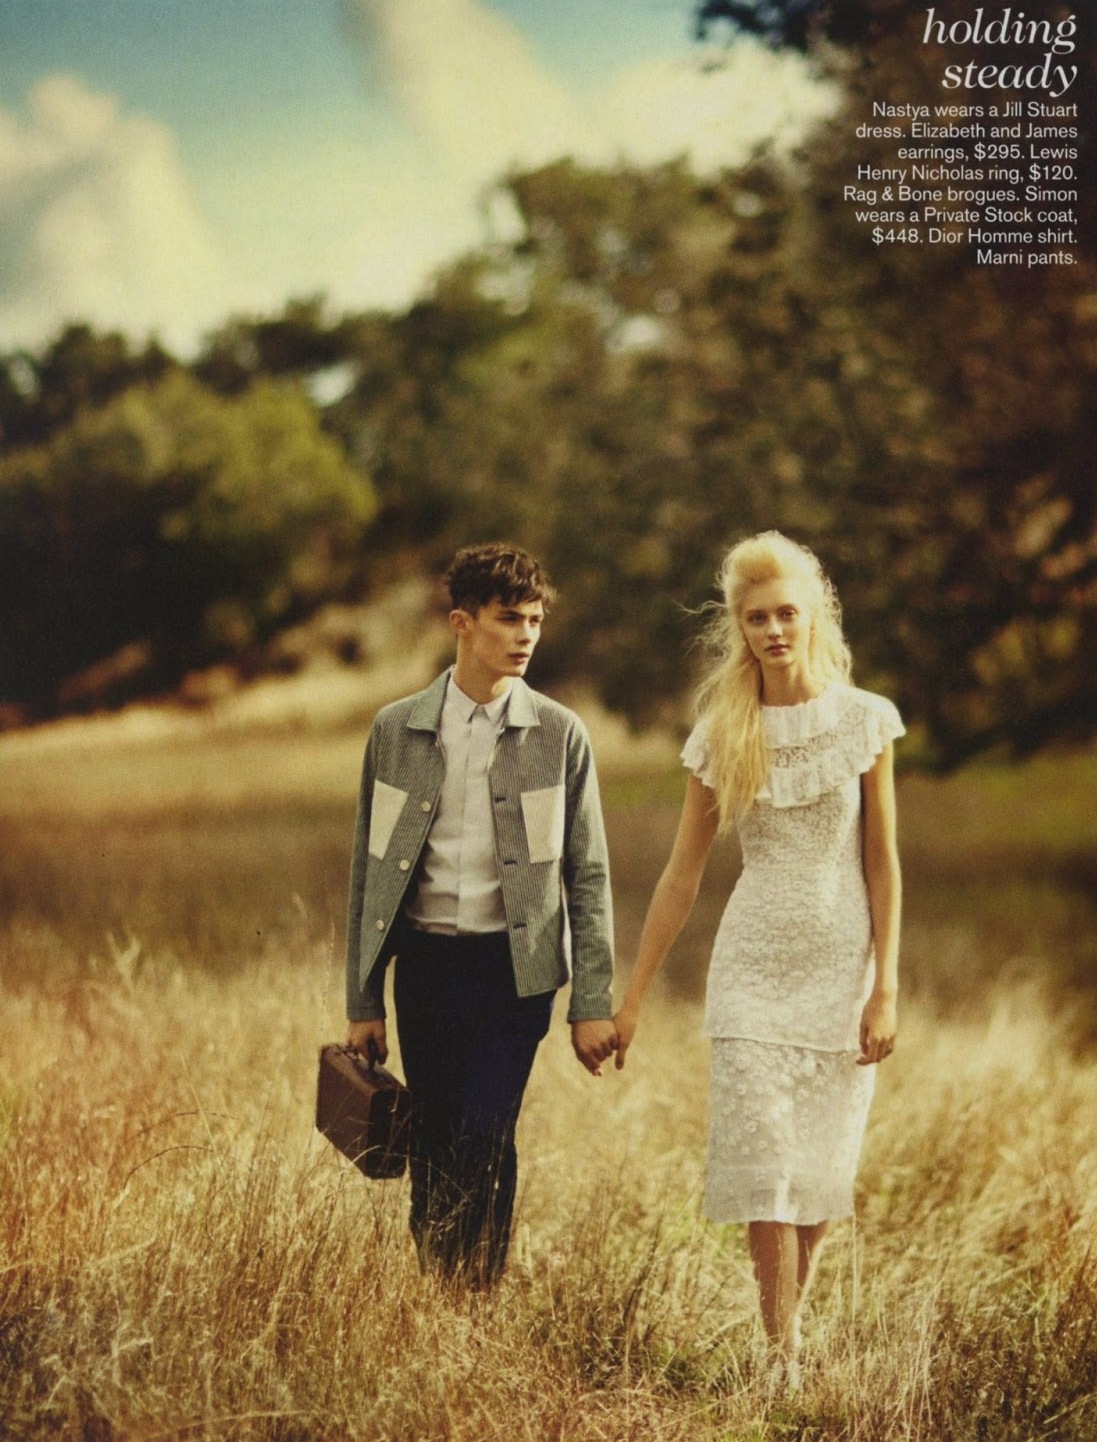 Šimon Kotyk Hits the Road for Teen Vogue's March 2013 Issue